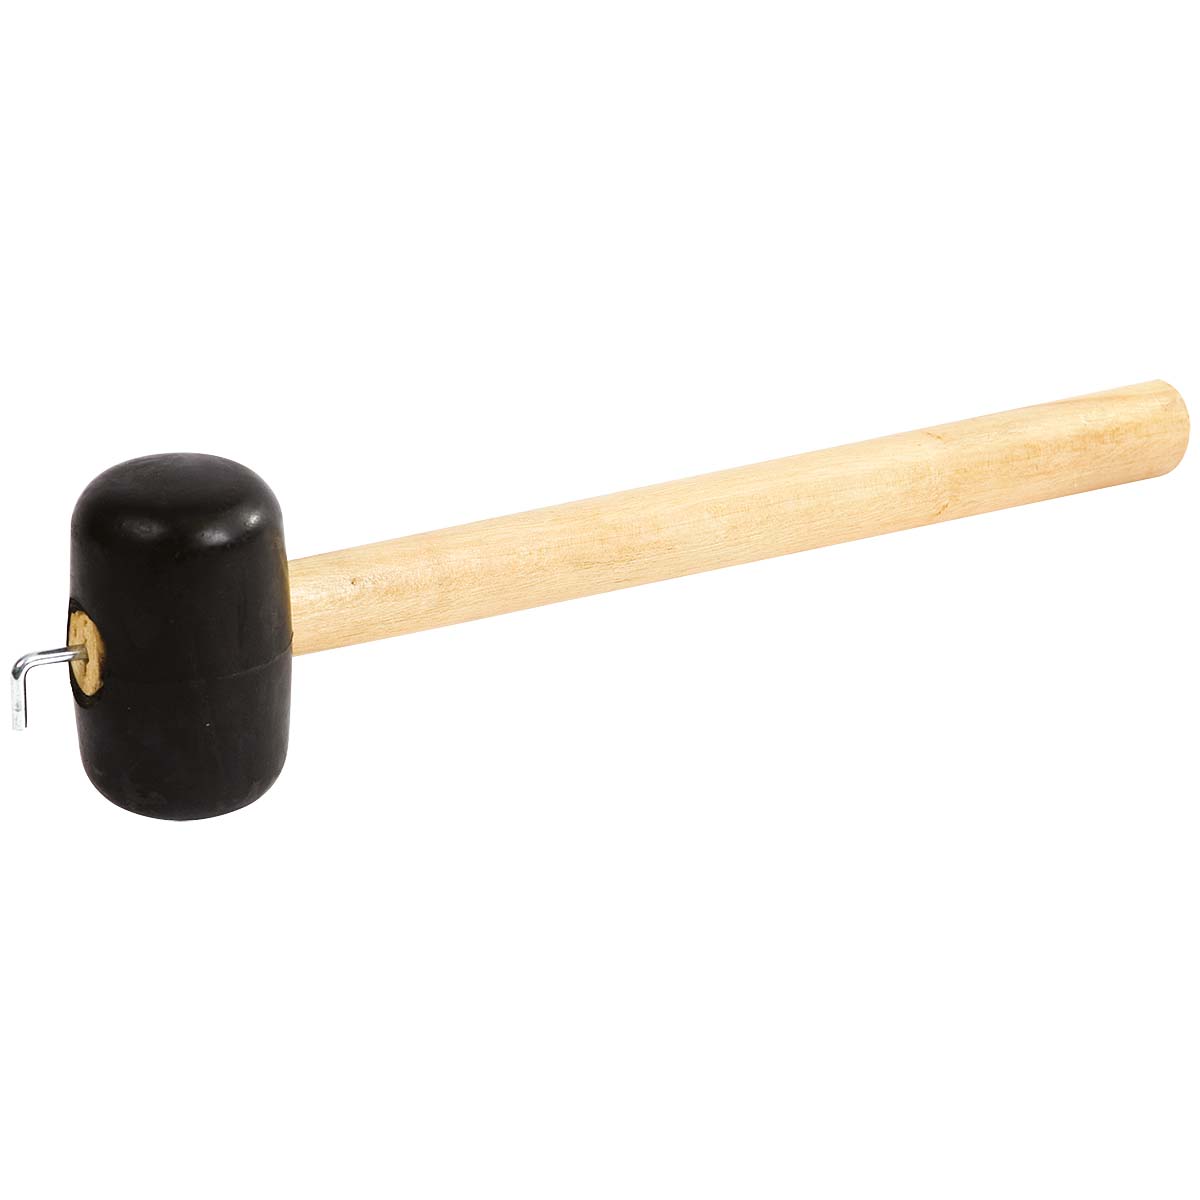 4114775 A solid rubber hammer. Equipped with a wooden handle with a strong reel at the end.